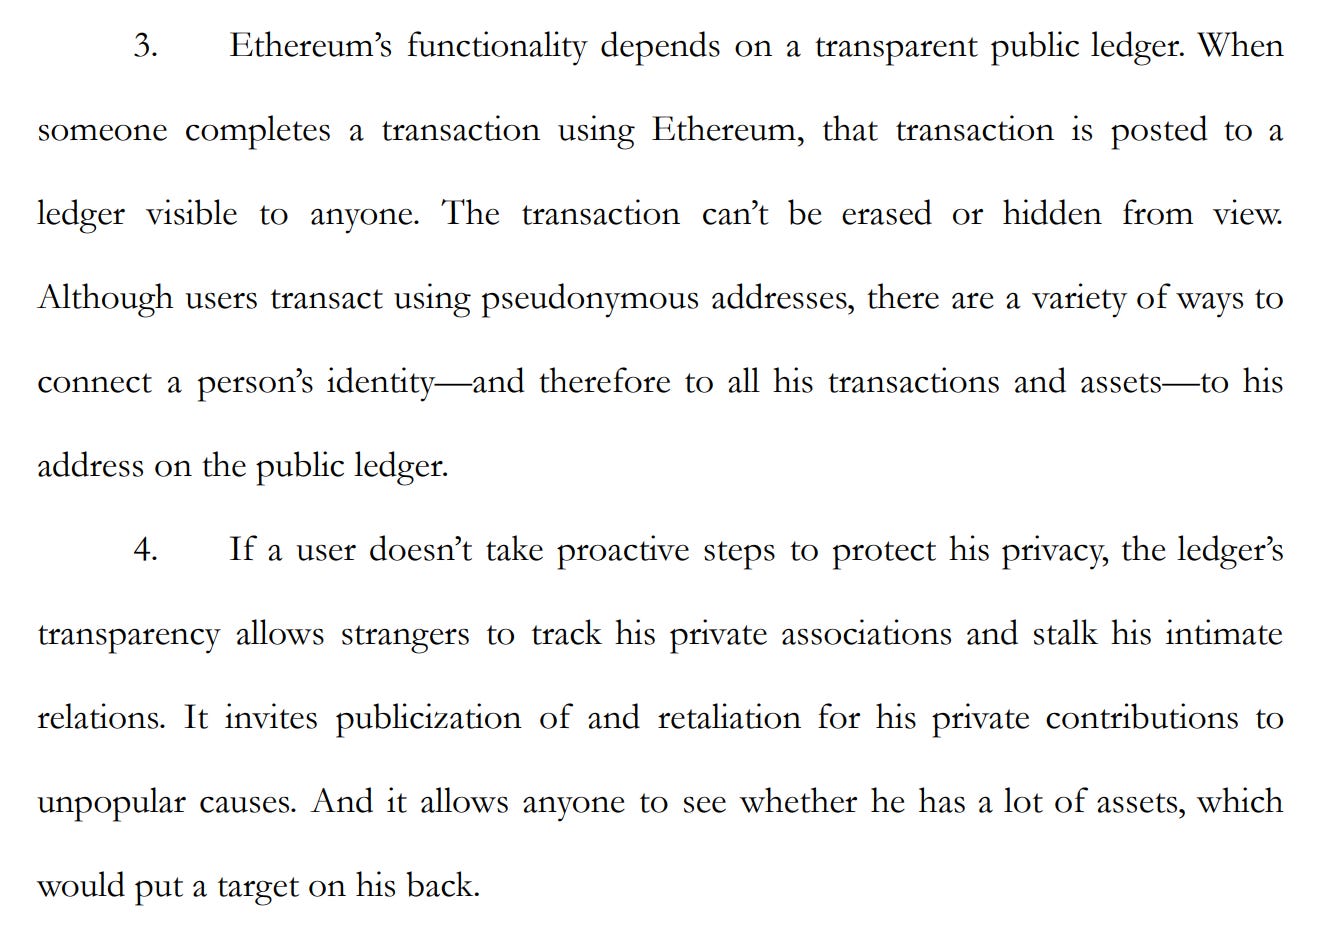 3. Ethereum’s functionality depends on a transparent public ledger. When someone completes a transaction using Ethereum, that transaction is posted to a ledger visible to anyone. The transaction can’t be erased or hidden from view. Although users transact using pseudonymous addresses, there are a variety of ways to connect a person’s identity—and therefore to all his transactions and assets—to his address on the public ledger. 4. If a user doesn’t take proactive steps to protect his privacy, the ledger’s transparency allows strangers to track his private associations and stalk his intimate relations. It invites publicization of and retaliation for his private contributions to unpopular causes. And it allows anyone to see whether he has a lot of assets, which would put a target on his back.